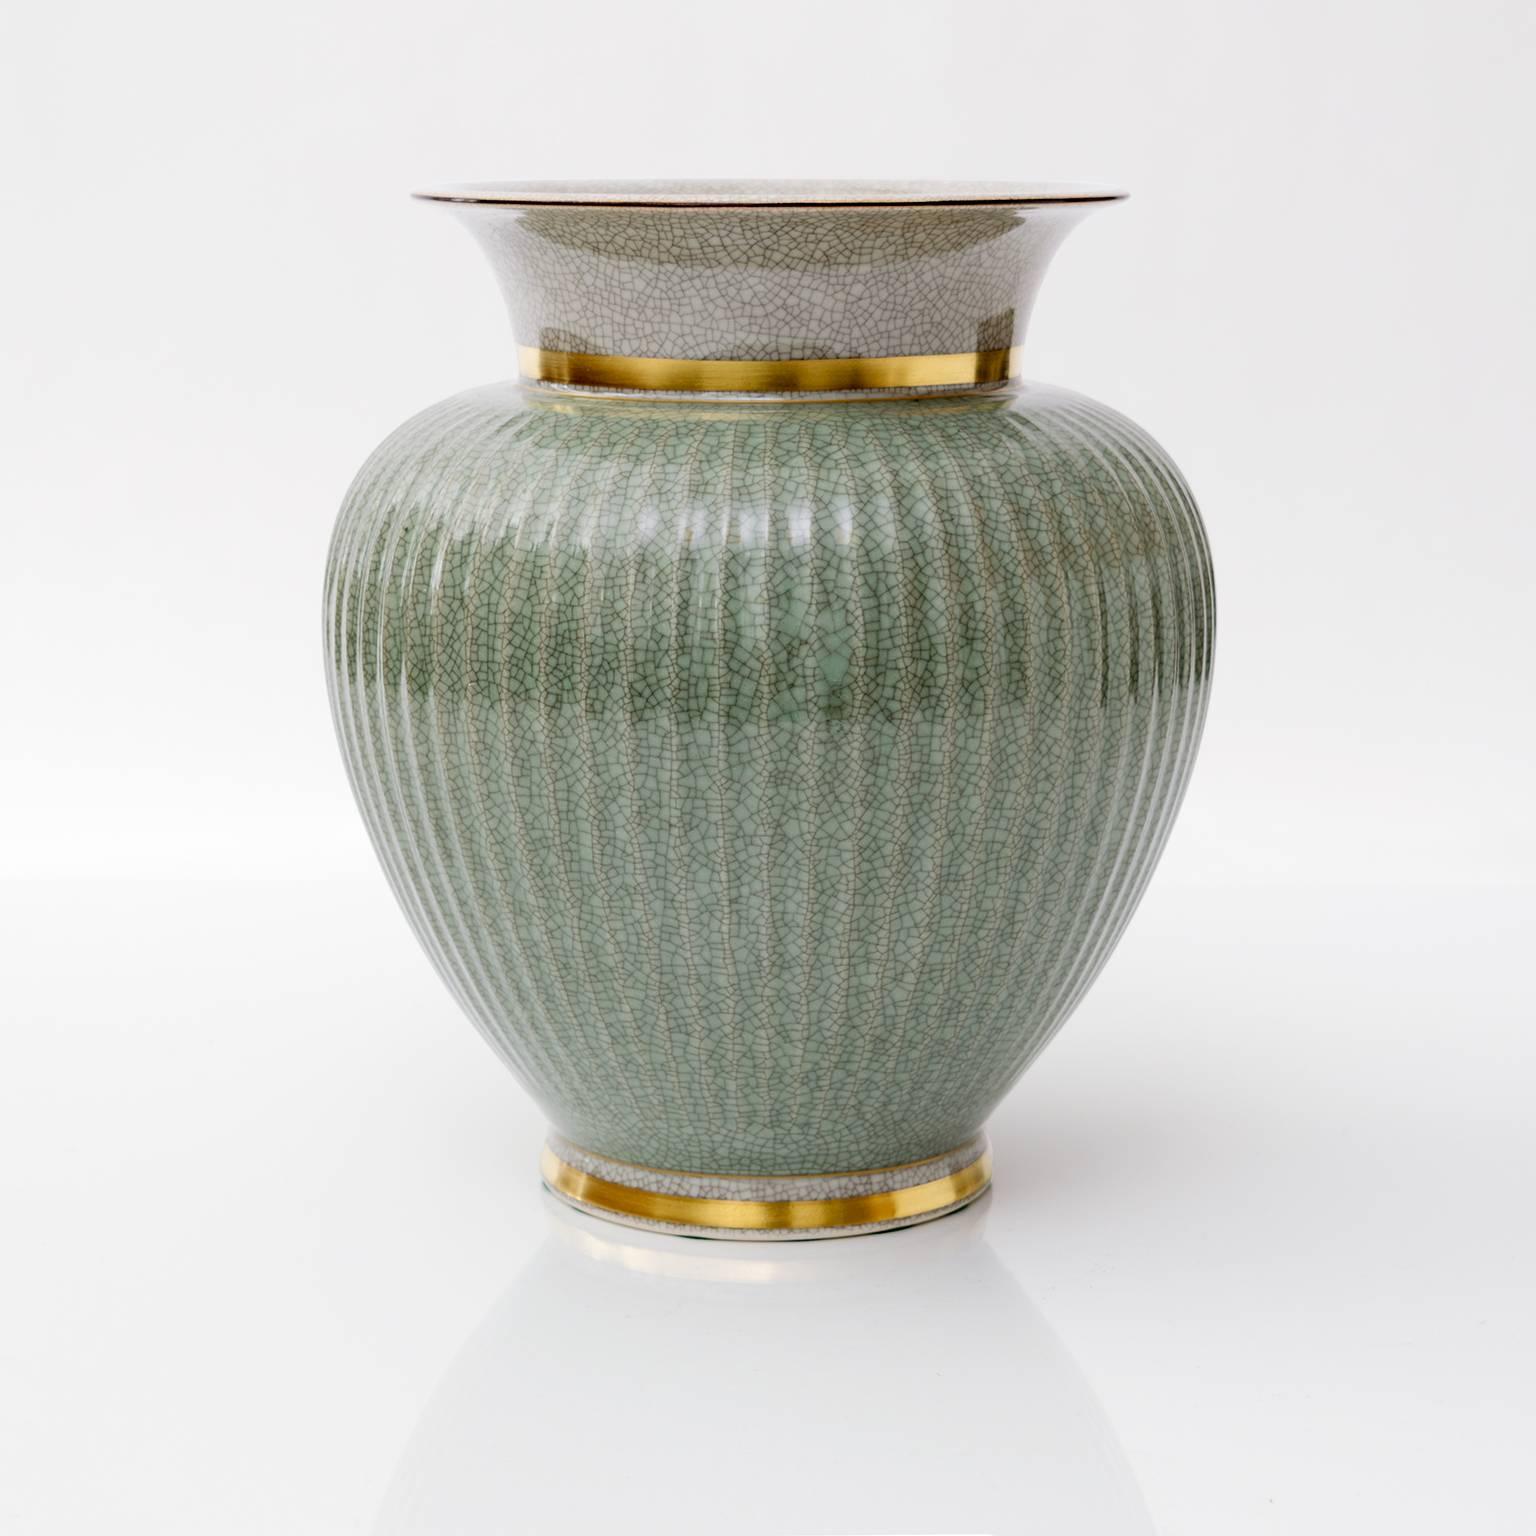 Scandinavian Modern, large Royal Copenhagen ceramic vase in green and white (craquelure) crackle glaze and detailed in gold. Made in Denmark, circa 1940s. Measures: Height 9.75